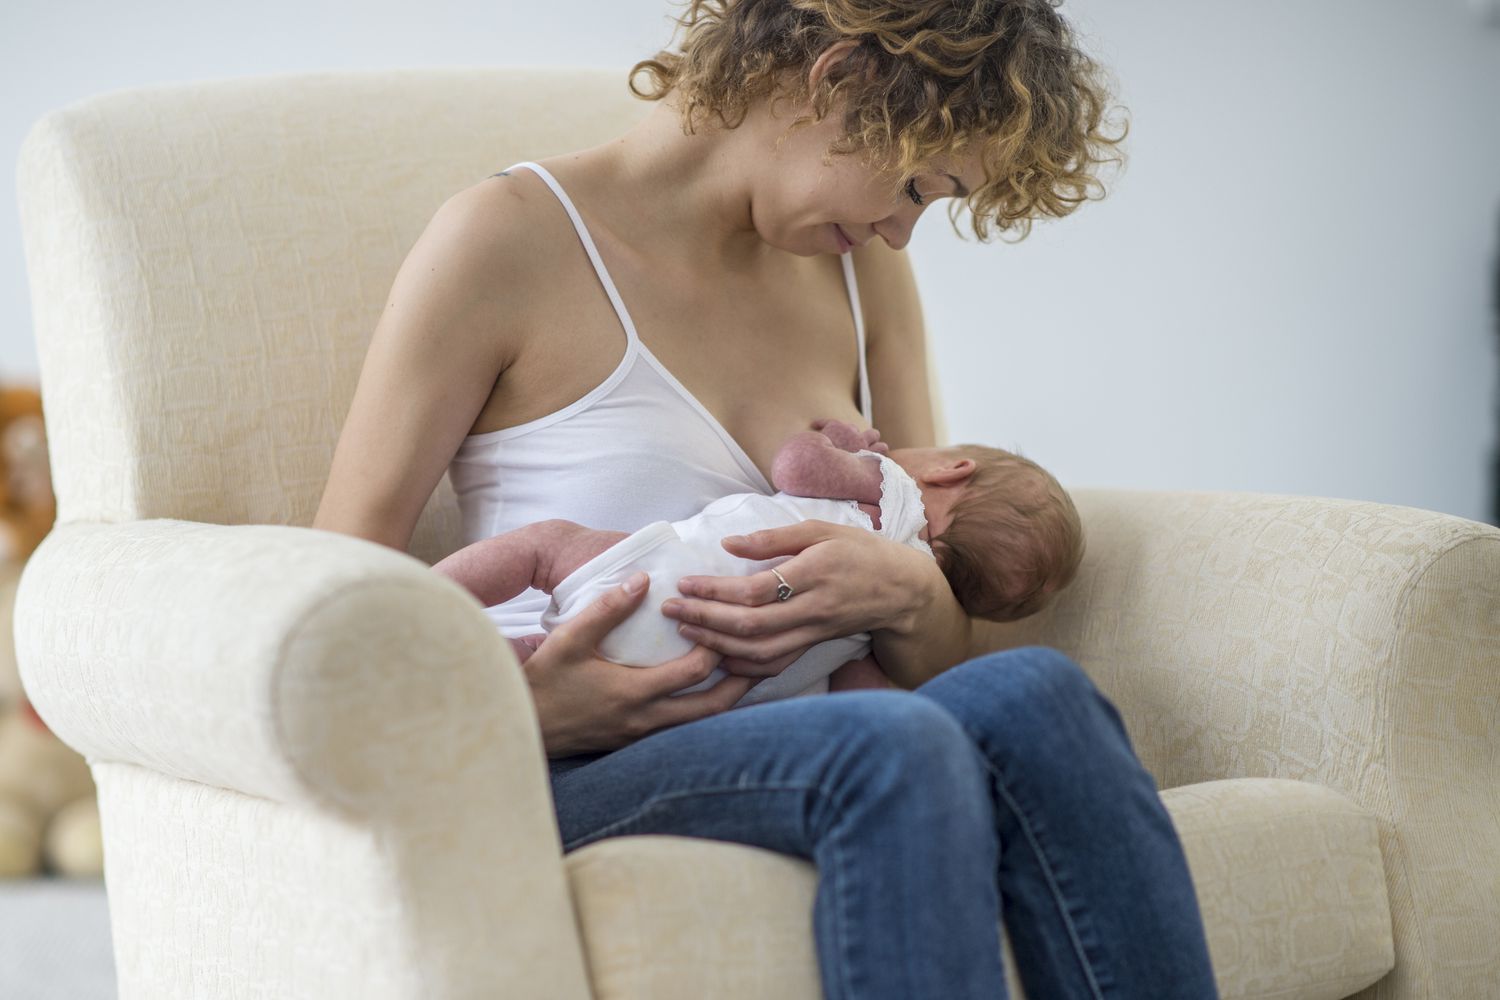 Remedies For Breast Pain During Breastfeeding